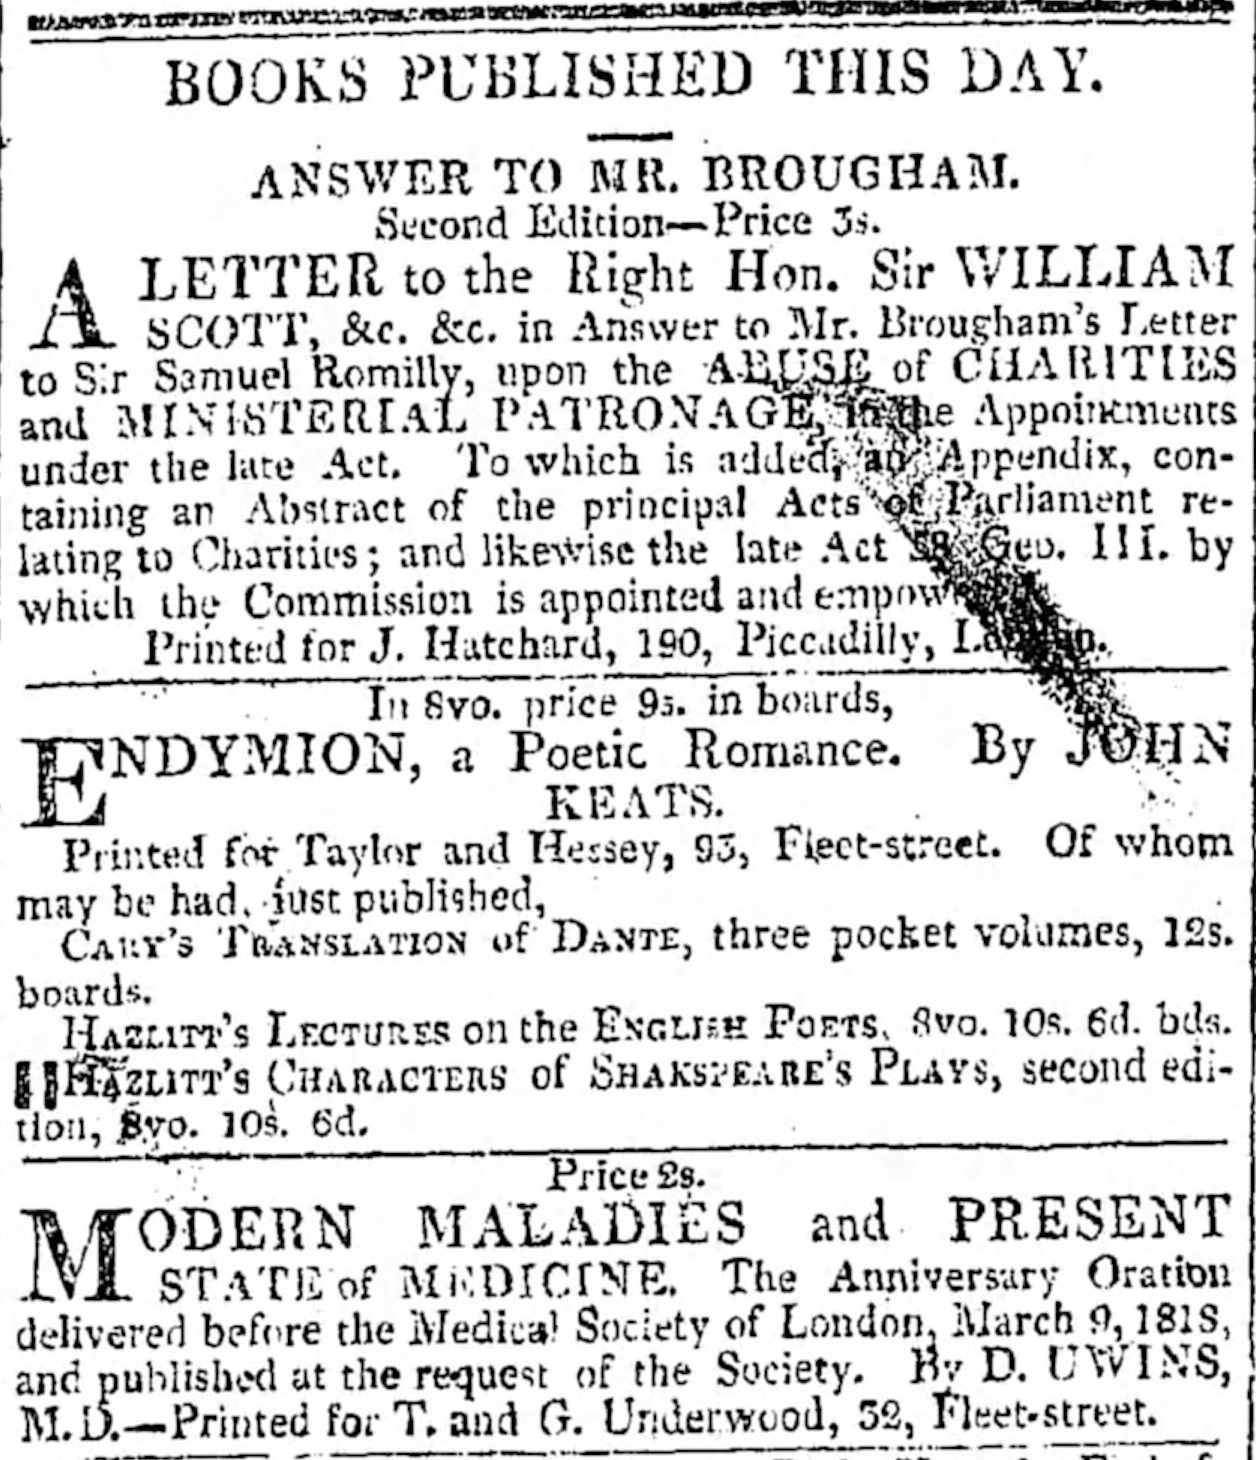  Keats and Hazlitt paired in a publication notice in The Morning Chronicle, 13 October 1818, along with Dante. Keats is in good
        company. Keats owns a copy of Hazlitt’s book as well as Cary’s pockettranslation of
        Dante. Click to enlarge.